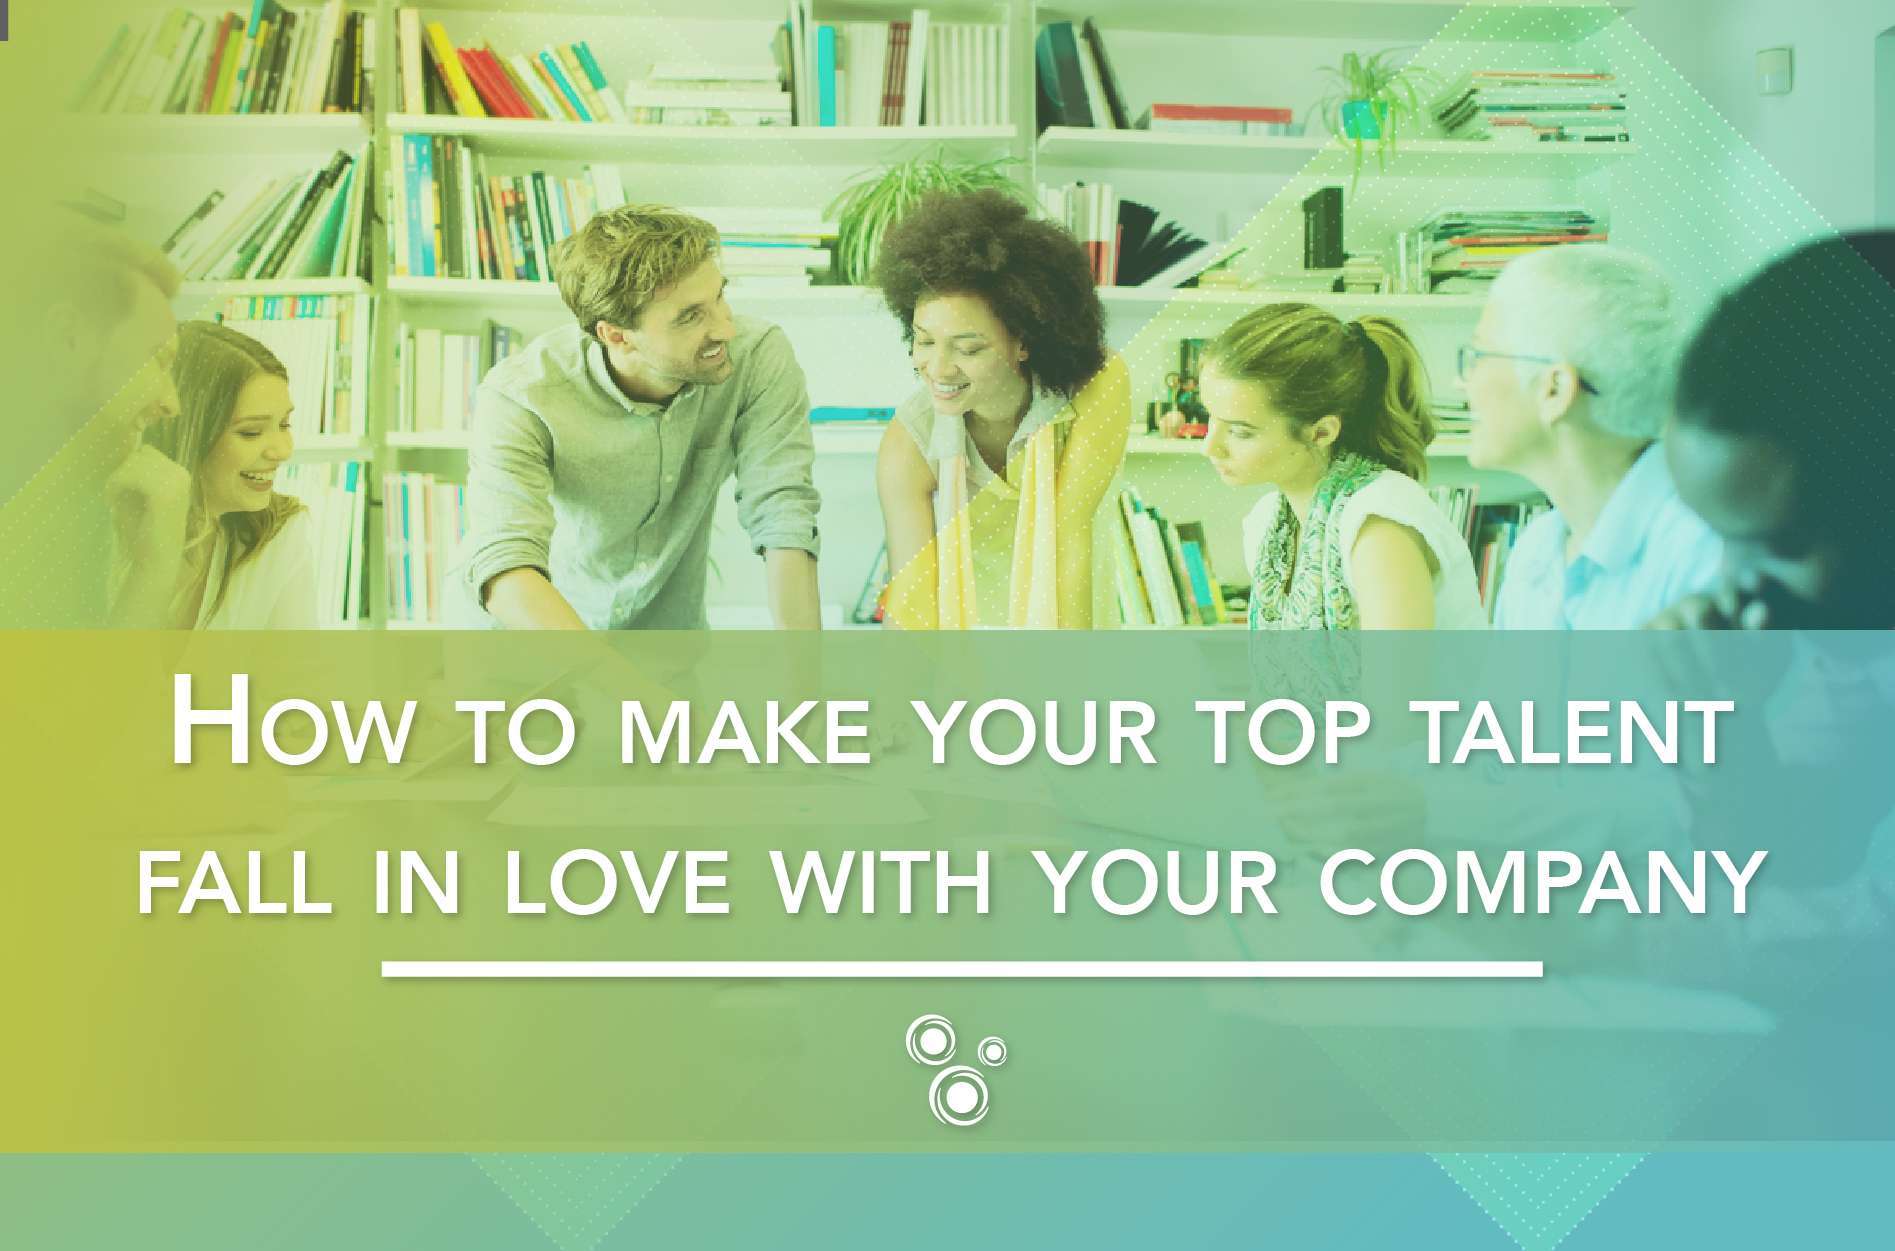 How to make your top talent fall in love with your company